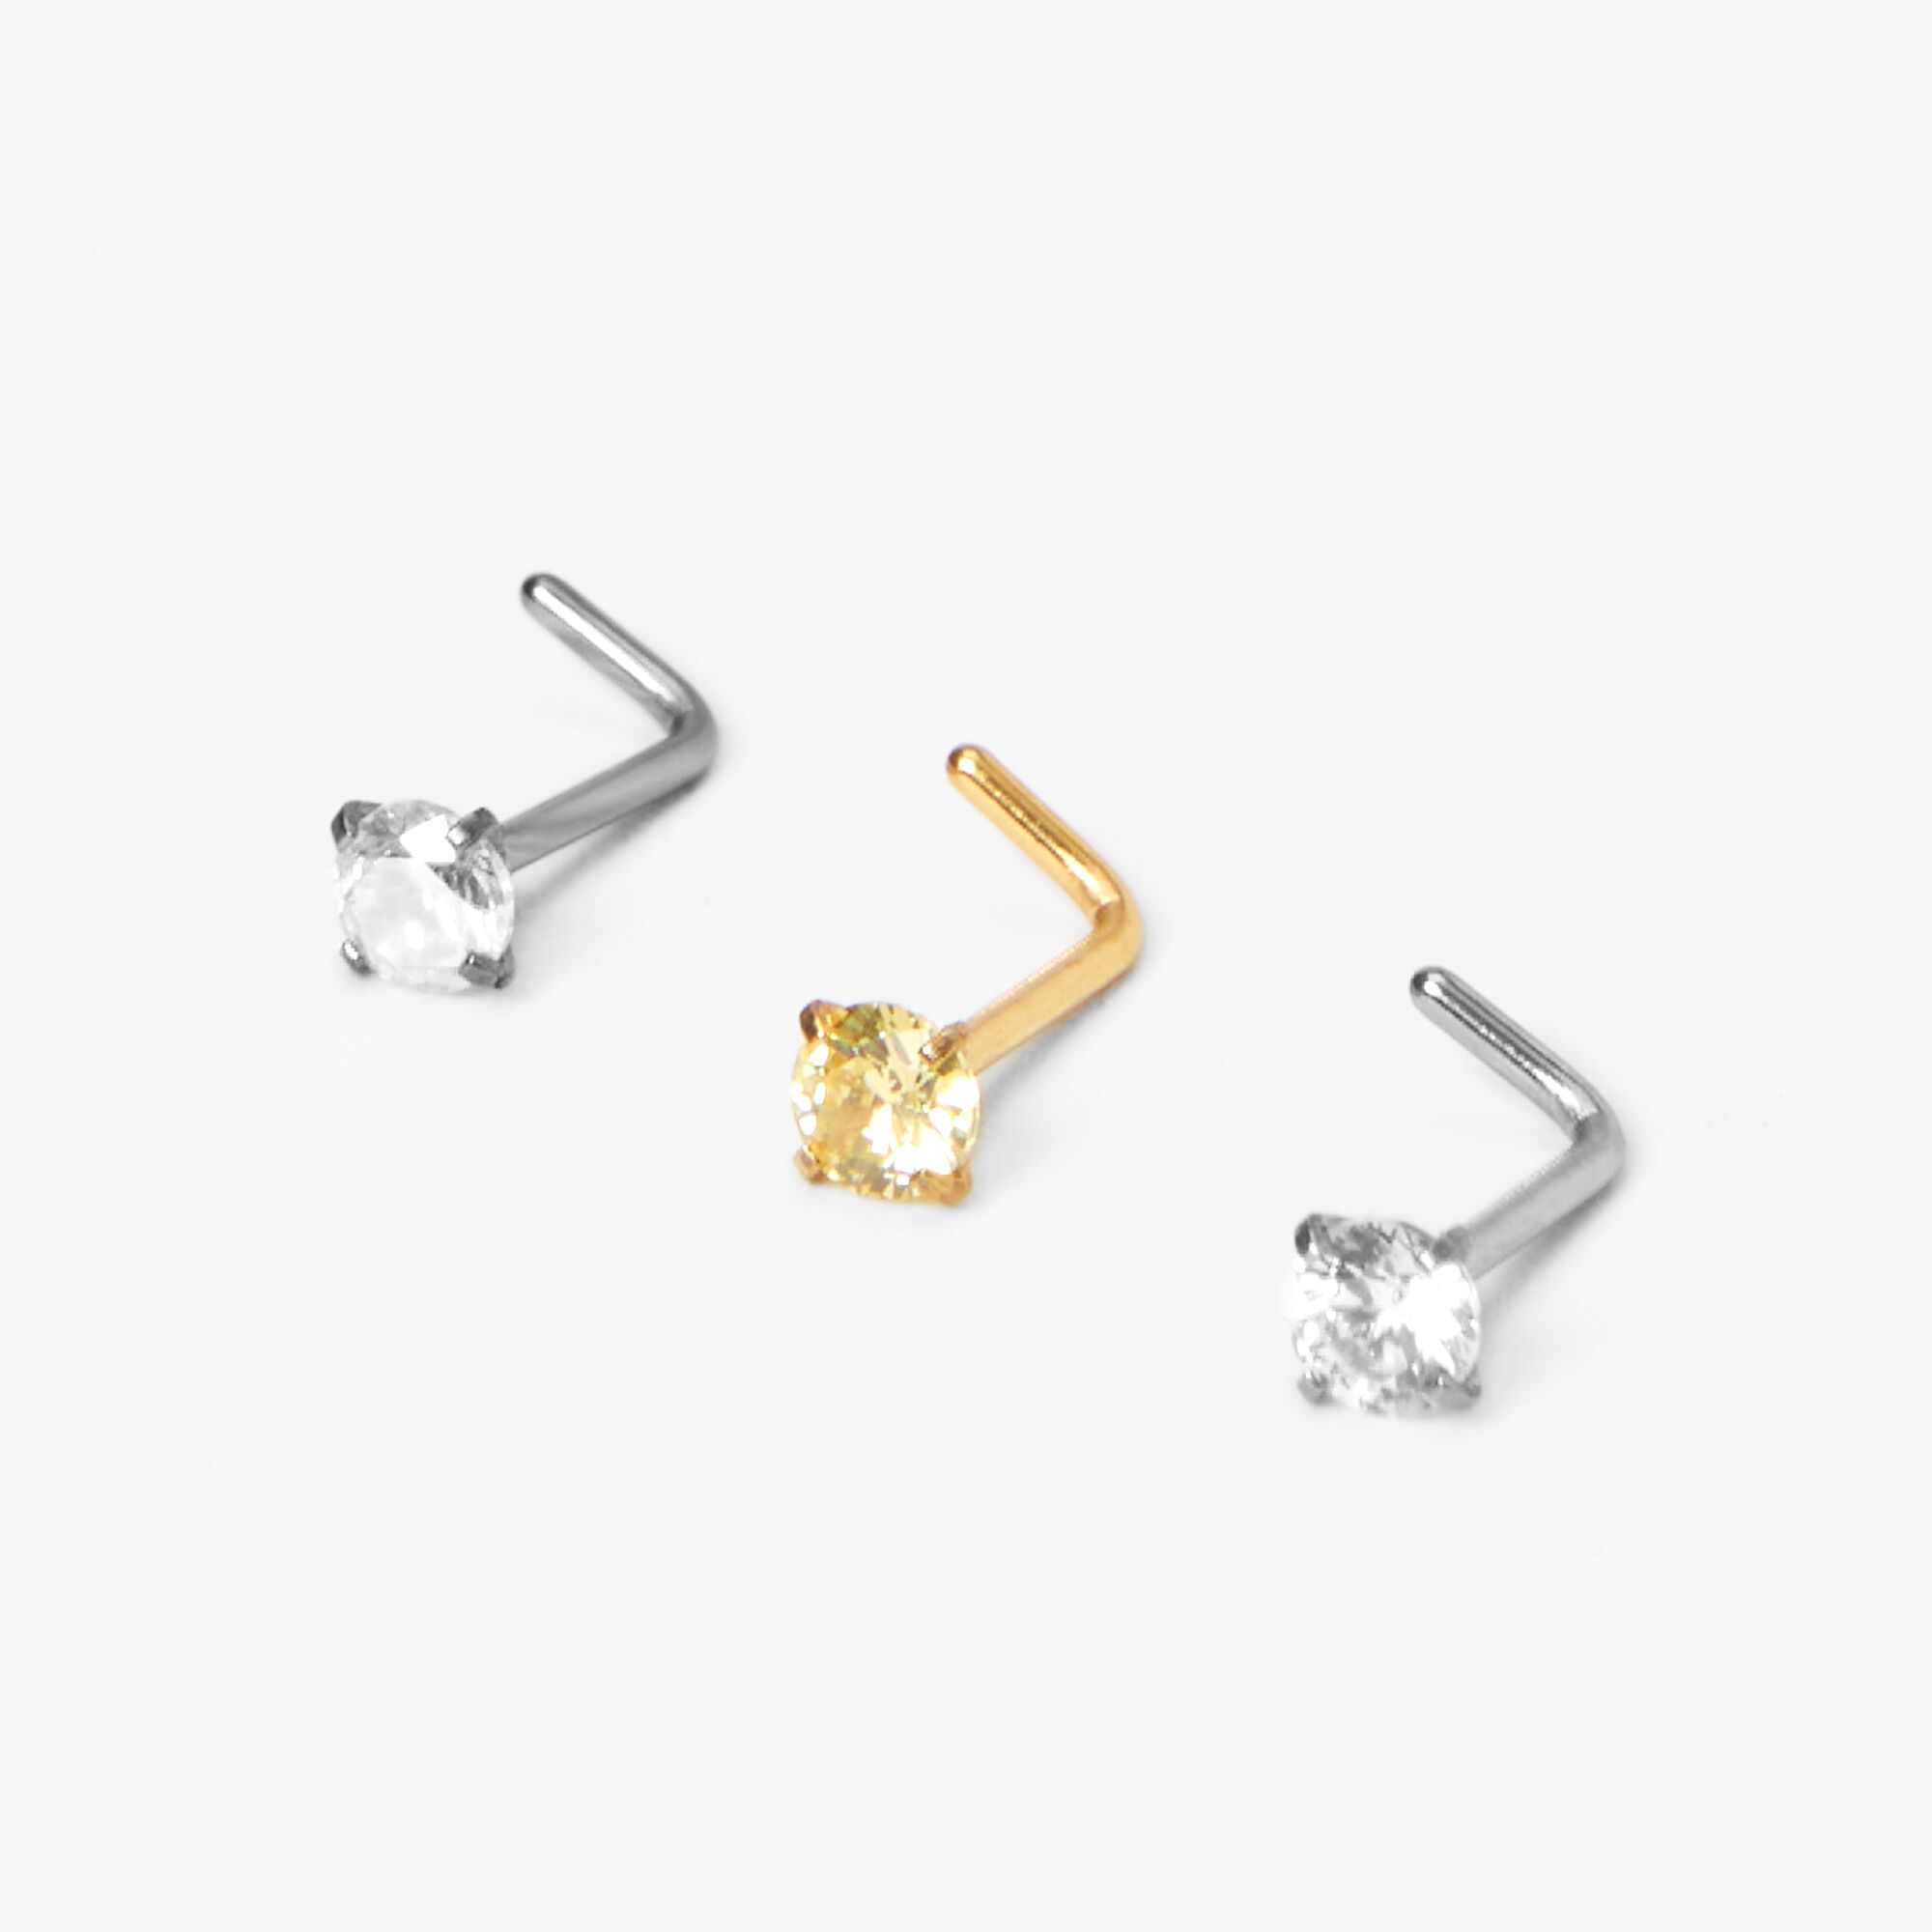 View Claires Mixed Metal 20G Crystal Nose Studs 3 Pack Gold information